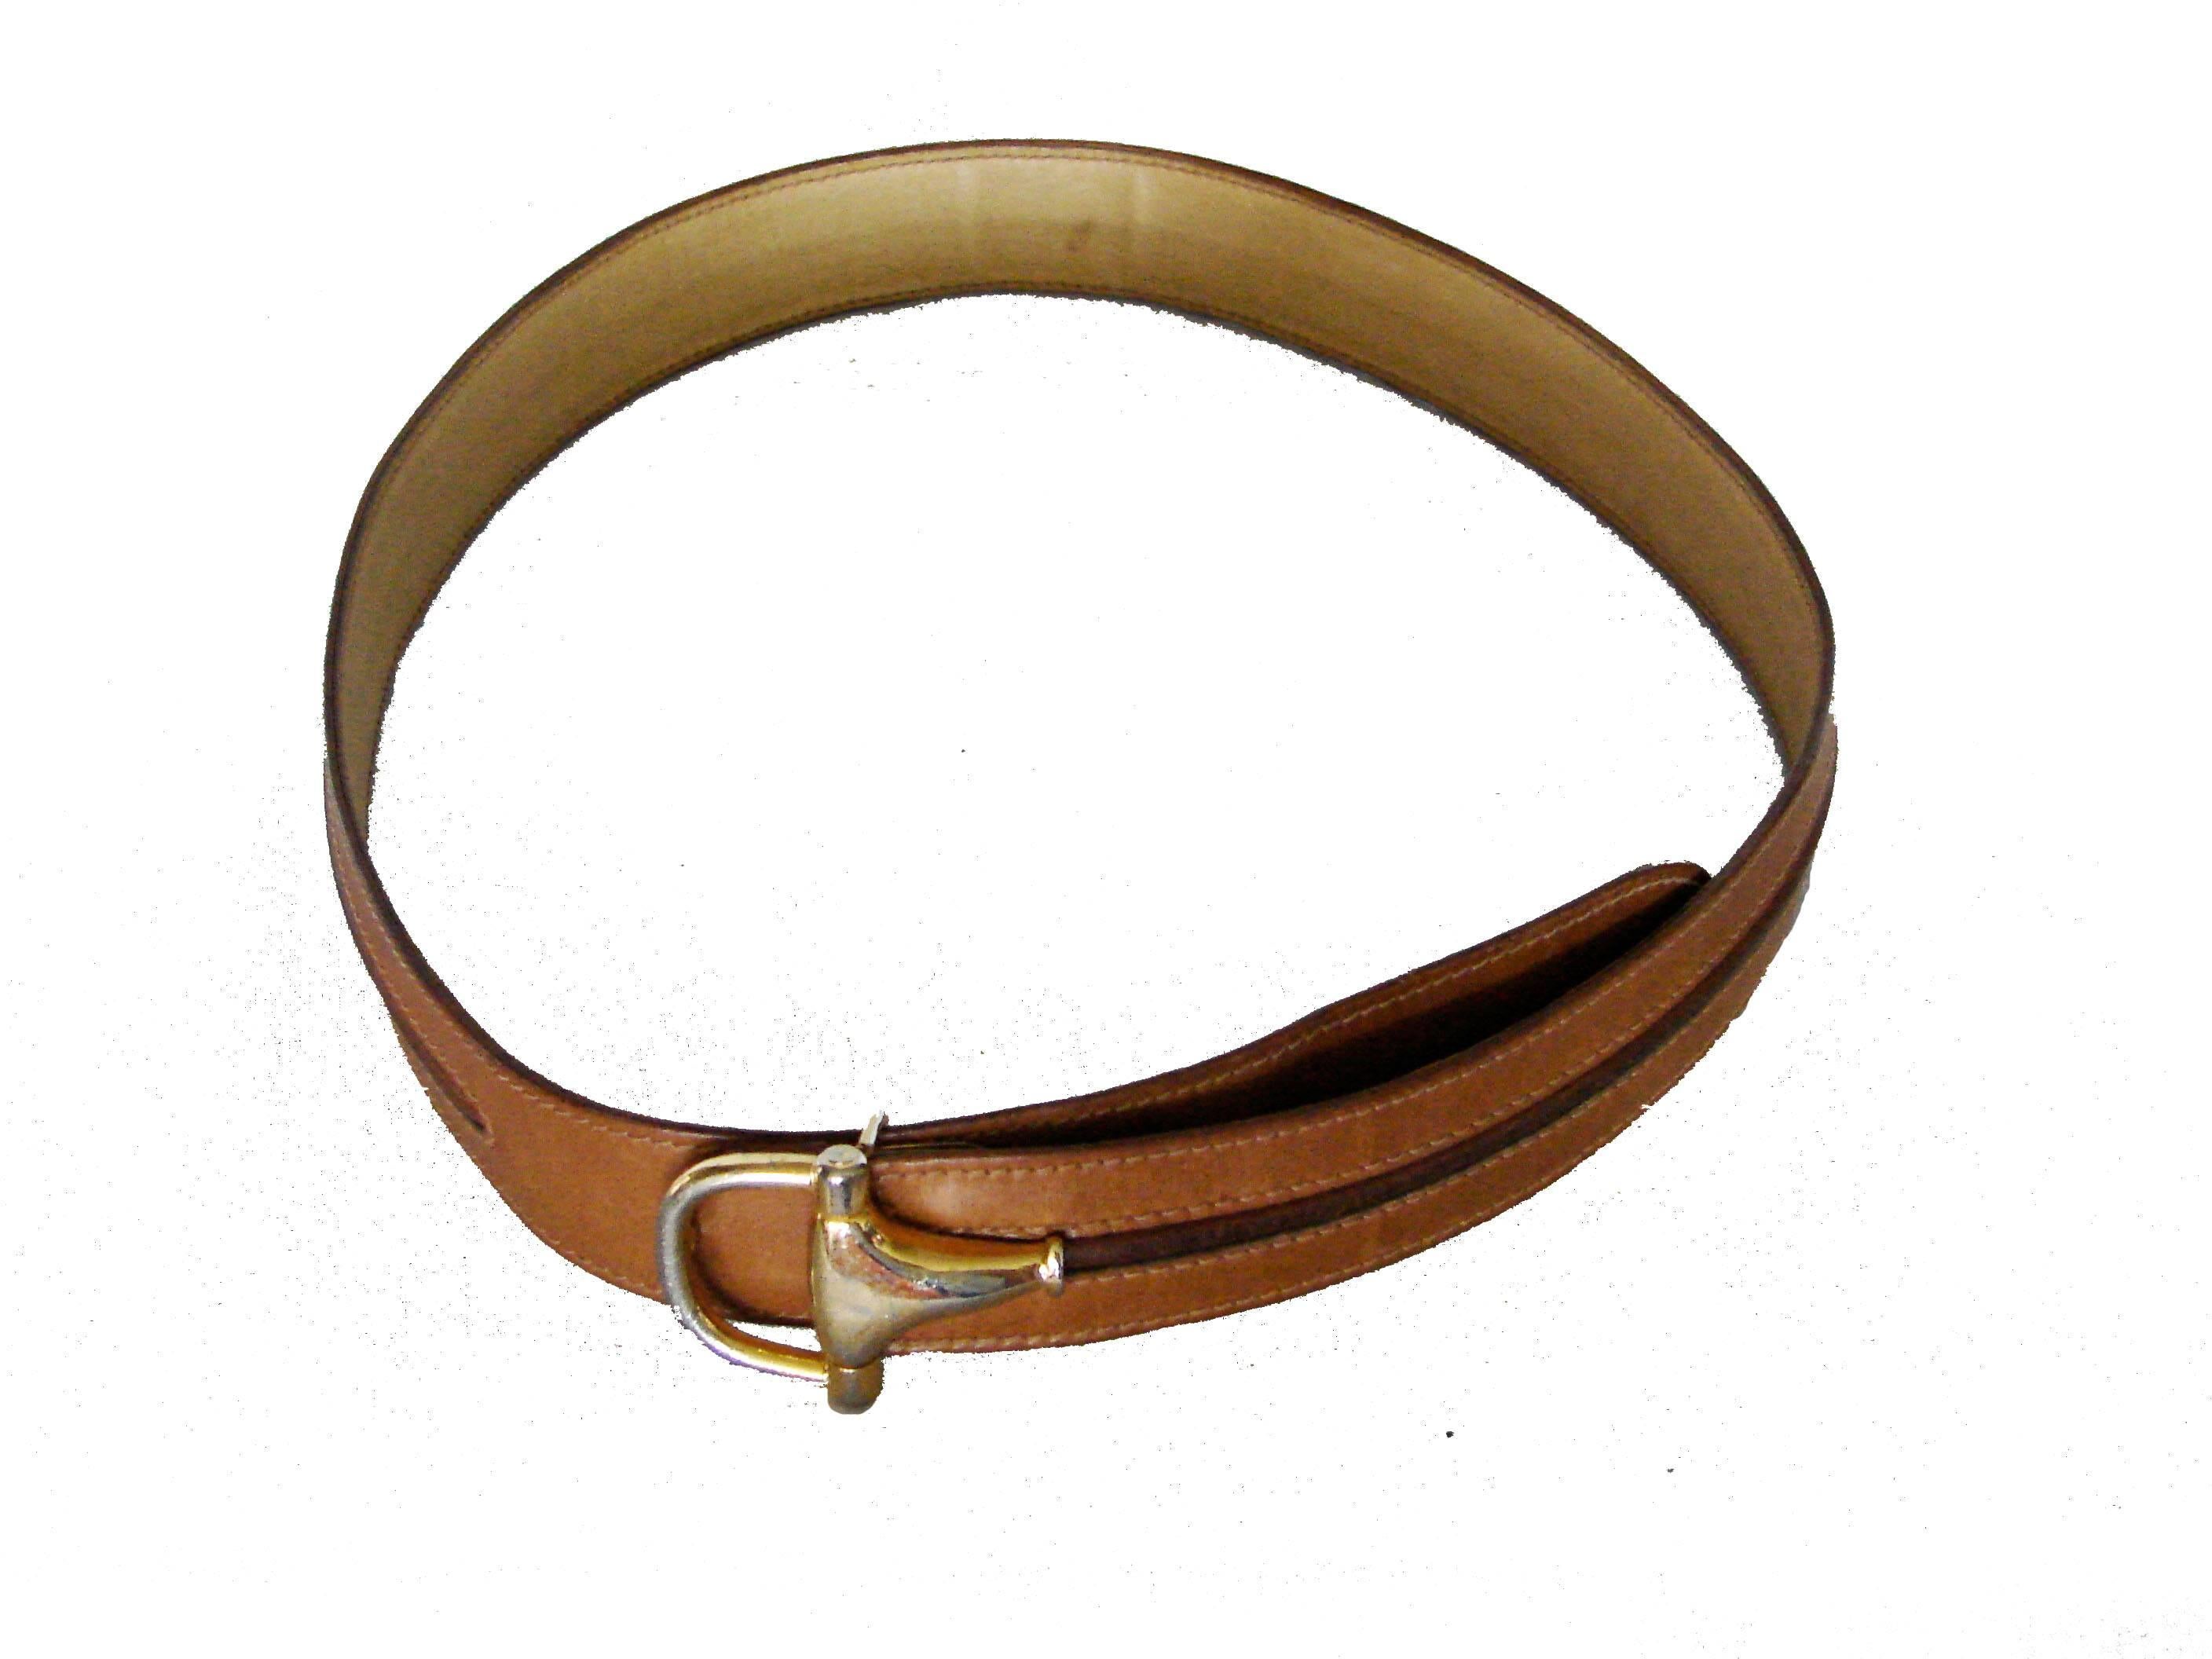 Gucci Tan and Brown Leather Belt with Horse Bit Buckle Size 75 30 1970s 1